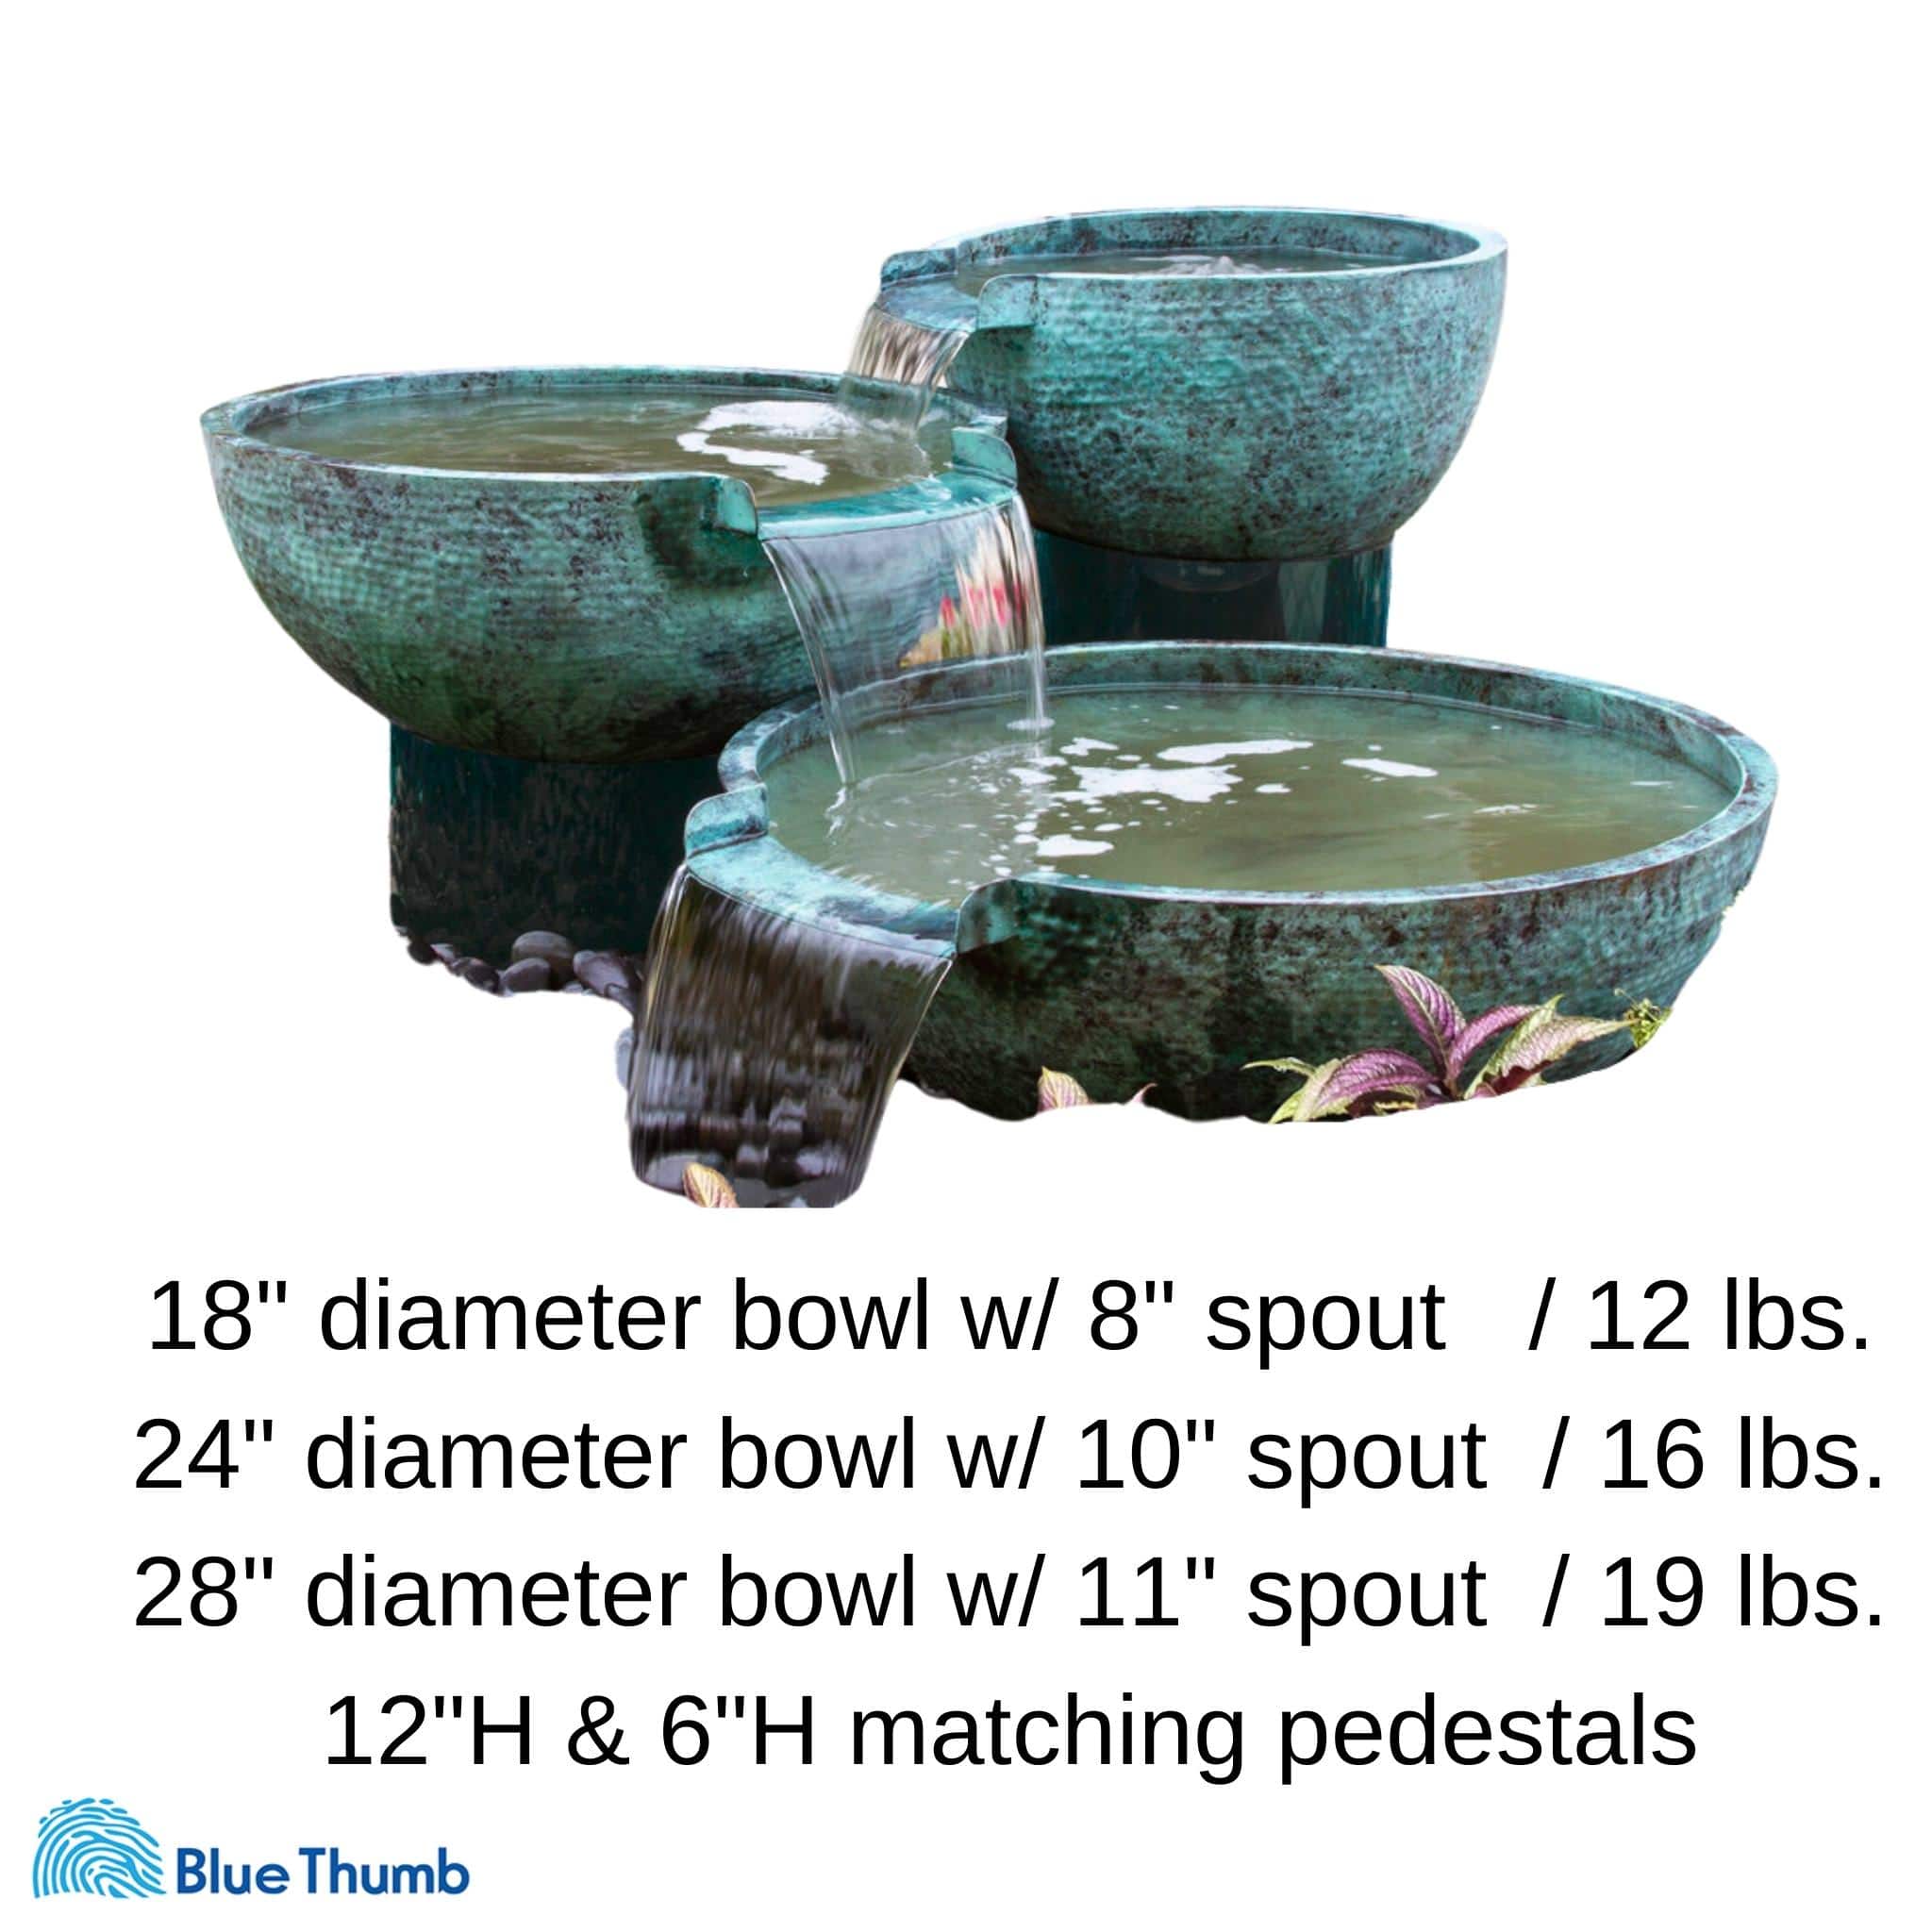 Triple Spillway Brass Bowl Fountain - Complete Kit - Blue Thumb